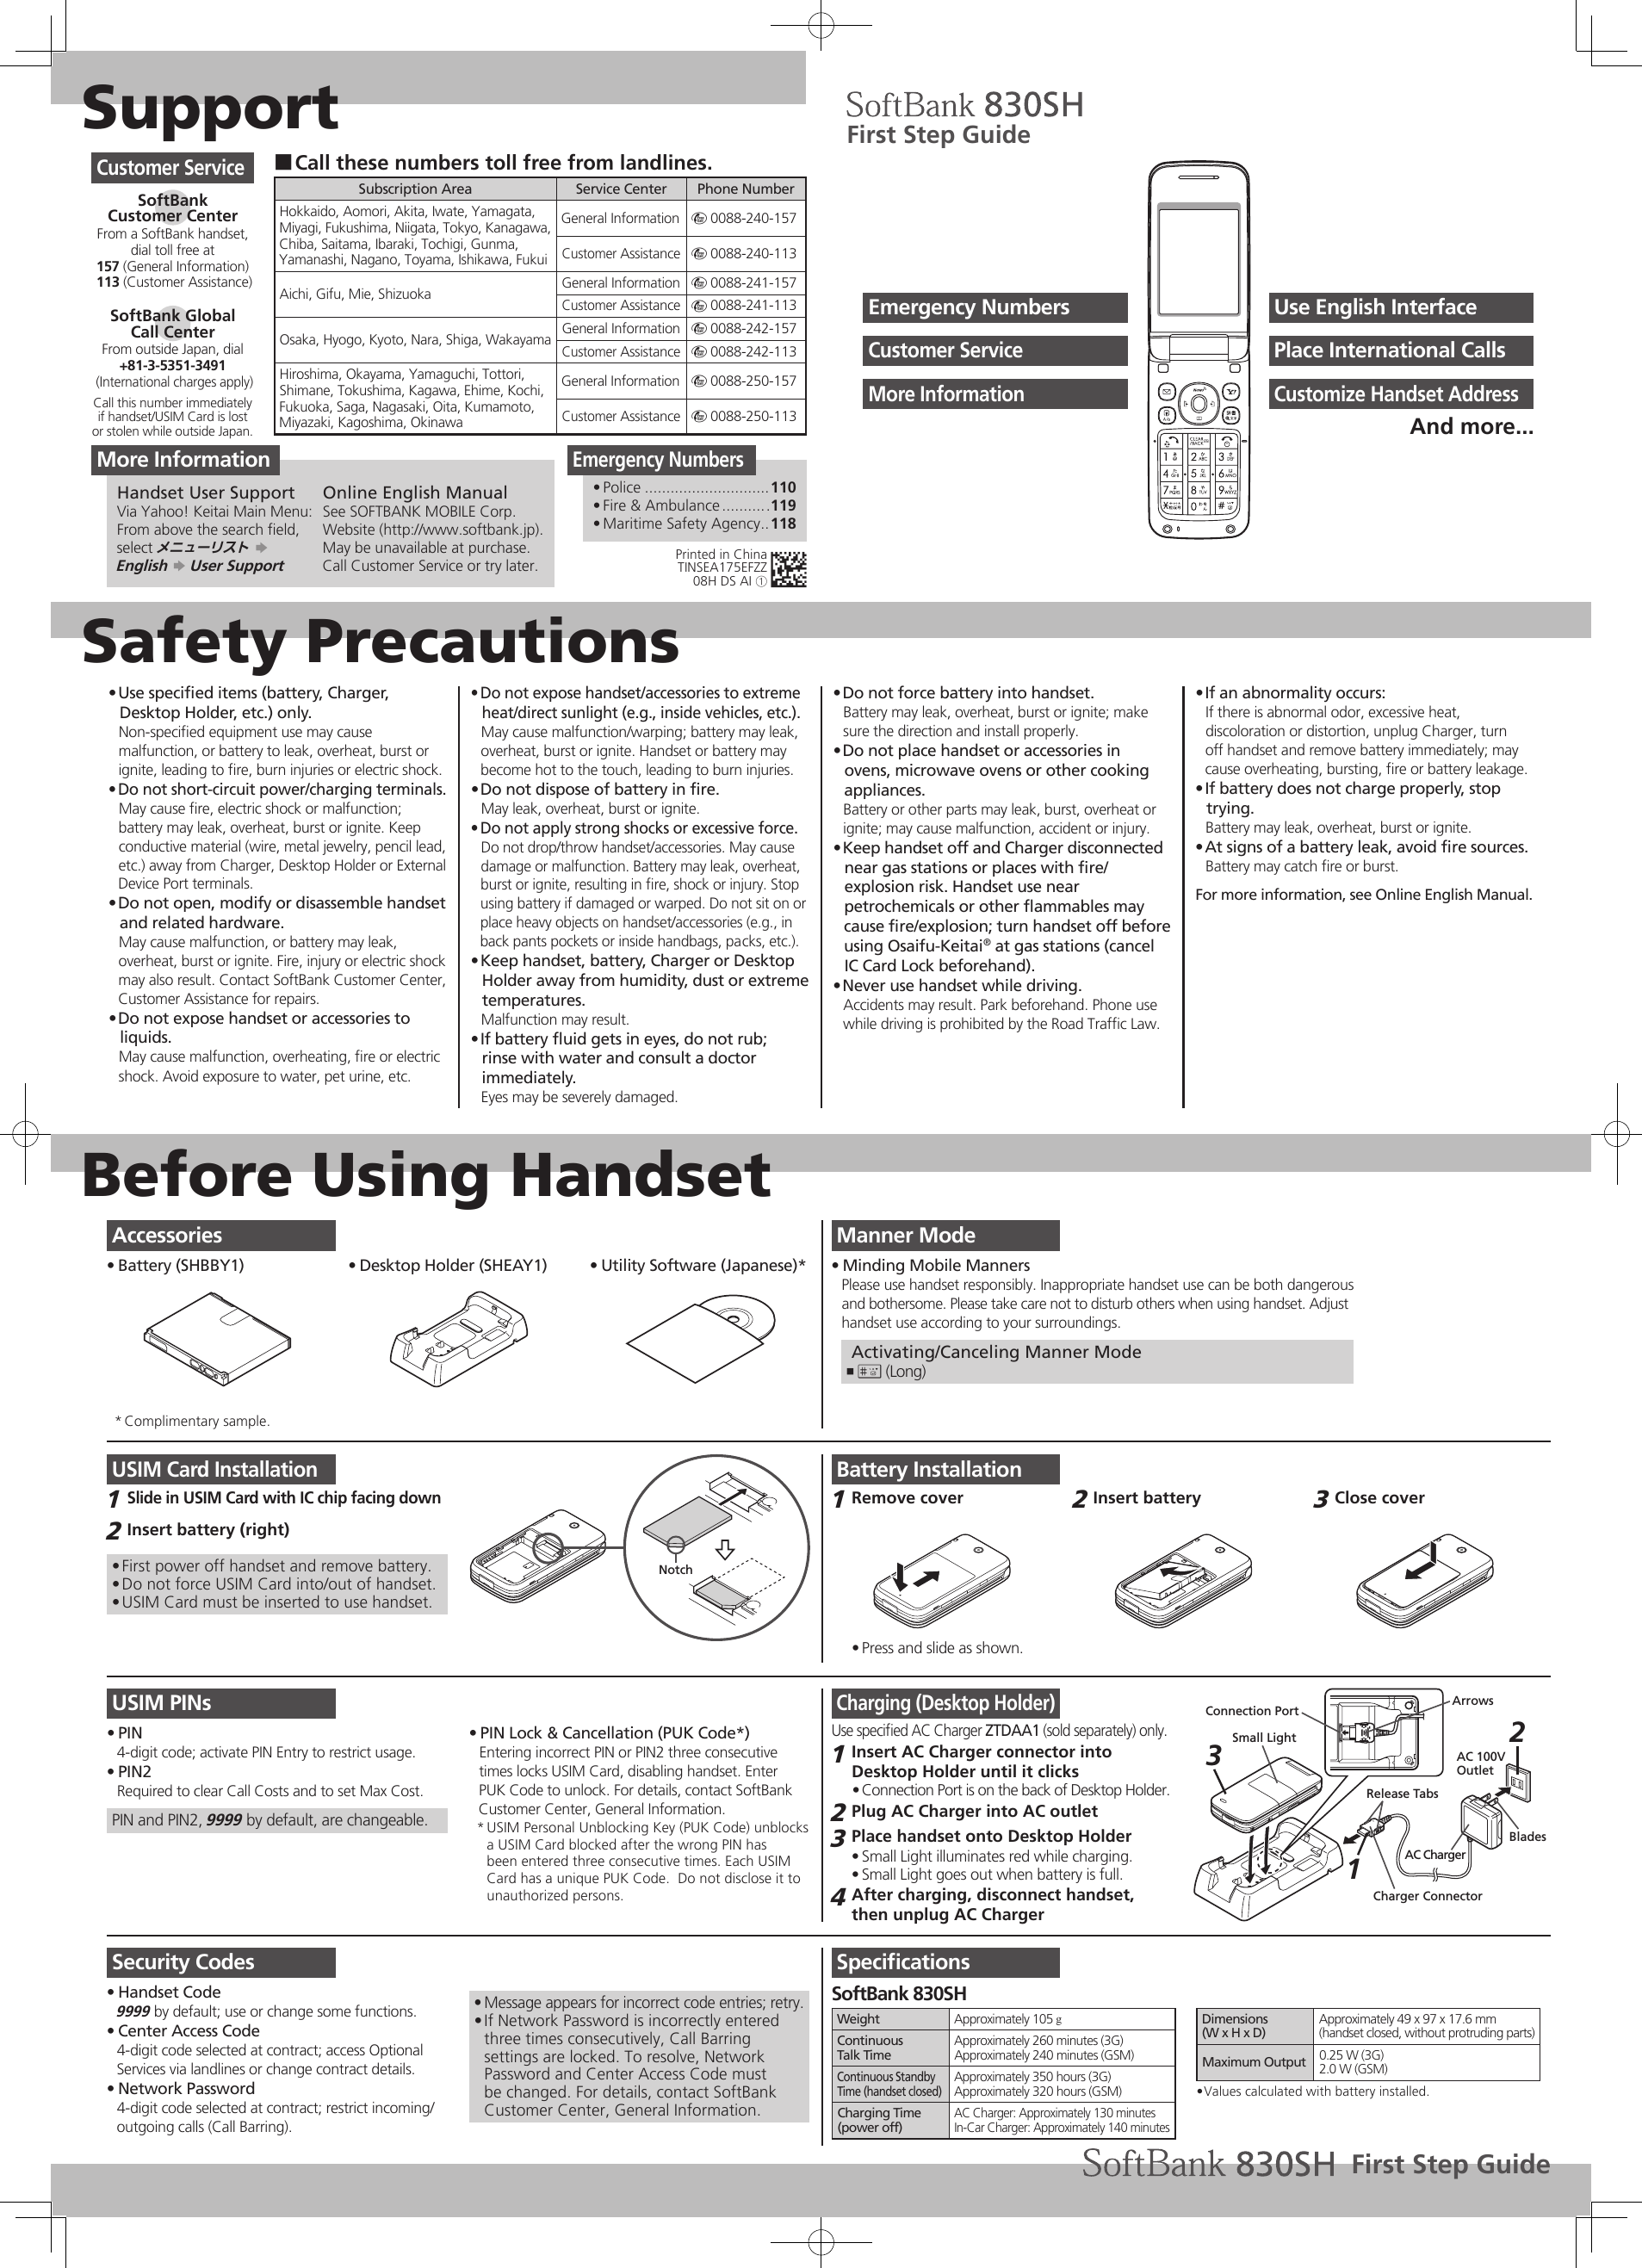 SupportSafety PrecautionsBefore Using HandsetUse speciﬁed items (battery, Charger, • Desktop Holder, etc.) only.Non-speciﬁed equipment use may cause malfunction, or battery to leak, overheat, burst or ignite, leading to ﬁre, burn injuries or electric shock.Do not short-circuit power/charging terminals.• May cause ﬁre, electric shock or malfunction; battery may leak, overheat, burst or ignite. Keep conductive material (wire, metal jewelry, pencil lead, etc.) away from Charger, Desktop Holder or External Device Port terminals.Do not open, modify or disassemble handset • and related hardware.May cause malfunction, or battery may leak, overheat, burst or ignite. Fire, injury or electric shock may also result. Contact SoftBank Customer Center, Customer Assistance for repairs.Do not expose handset or accessories to • liquids.May cause malfunction, overheating, ﬁre or electric shock. Avoid exposure to water, pet urine, etc.Do not expose handset/accessories to extreme • heat/direct sunlight (e.g., inside vehicles, etc.).May cause malfunction/warping; battery may leak, overheat, burst or ignite. Handset or battery may become hot to the touch, leading to burn injuries.Do not dispose of battery in ﬁre.• May leak, overheat, burst or ignite.Do not apply strong shocks or excessive force.• Do not drop/throw handset/accessories. May cause damage or malfunction. Battery may leak, overheat, burst or ignite, resulting in ﬁre, shock or injury. Stop using battery if damaged or warped. Do not sit on or place heavy objects on handset/accessories (e.g., in back pants pockets or inside handbags, packs, etc.).Keep handset, battery, Charger or Desktop • Holder away from humidity, dust or extreme temperatures.Malfunction may result.If battery ﬂuid gets in eyes, do not rub; • rinse with water and consult a doctor immediately.Eyes may be severely damaged.Do not force battery into handset.• Battery may leak, overheat, burst or ignite; make sure the direction and install properly.Do not place handset or accessories in • ovens, microwave ovens or other cooking appliances.Battery or other parts may leak, burst, overheat or ignite; may cause malfunction, accident or injury.Keep handset off and Charger disconnected • near gas stations or places with ﬁre/explosion risk. Handset use near petrochemicals or other ﬂammables may cause ﬁre/explosion; turn handset off before using Osaifu-Keitai® at gas stations (cancel IC Card Lock beforehand).Never use handset while driving.• Accidents may result. Park beforehand. Phone use while driving is prohibited by the Road Trafﬁc Law.If an abnormality occurs:• If there is abnormal odor, excessive heat, discoloration or distortion, unplug Charger, turn off handset and remove battery immediately; may cause overheating, bursting, ﬁre or battery leakage.If battery does not charge properly, stop • trying.Battery may leak, overheat, burst or ignite.At signs of a battery leak, avoid ﬁre sources.• Battery may catch ﬁre or burst.For more information, see Online English Manual.Manner ModeMinding Mobile Manners• Please use handset responsibly. Inappropriate handset use can be both dangerousand bothersome. Please take care not to disturb others when using handset. Adjusthandset use according to your surroundings. Activating/Canceling Manner Mode# ,  (Long)USIM Card InstallationSlide in USIM Card with IC chip facing down1 Insert battery (right)2 First power off handset and remove battery.• Do not force USIM Card into/out of handset.• USIM Card must be inserted to use handset.• NotchUSIM PINsPIN• 4-digit code; activate PIN Entry to restrict usage.PIN2• Required to clear Call Costs and to set Max Cost.PIN and PIN2, 9999 by default, are changeable.PIN Lock &amp; Cancellation (PUK Code*)• Entering incorrect PIN or PIN2 three consecutivetimes locks USIM Card, disabling handset. EnterPUK Code to unlock. For details, contact SoftBank Customer Center, General Information.USIM Personal Unblocking Key (PUK Code) unblocks * a USIM Card blocked after the wrong PIN has been entered three consecutive times. Each USIM Card has a unique PUK Code.  Do not disclose it to unauthorized persons.Security CodesHandset Code• 9999 by default; use or change some functions.Center Access Code• 4-digit code selected at contract; access Optional Services via landlines or change contract details.Network Password• 4-digit code selected at contract; restrict incoming/outgoing calls (Call Barring).Message appears for incorrect code entries; retry.• If Network Password is incorrectly entered • three times consecutively, Call Barring settings are locked. To resolve, Network Password and Center Access Code must be changed. For details, contact SoftBank Customer Center, General Information.Charging (Desktop Holder)Use speciﬁed AC Charger ZTDAA1 (sold separately) only.Insert AC Charger connector into 1 Desktop Holder until it clicksConnection Port is on the back of Desktop Holder.• Plug AC Charger into AC outlet2 Place handset onto Desktop Holder3 Small Light illuminates red while charging.• Small Light goes out when battery is full.• After charging, disconnect handset, 4 then unplug AC ChargerAC 100VOutletBladesAC ChargerRelease TabsCharger ConnectorArrowsConnection Port31Small Light 2SpeciﬁcationsSoftBank 830SHWeight Approximately 105 gContinuousTalk TimeApproximately 260 minutes (3G)Approximately 240 minutes (GSM)Continuous Standby Time (handset closed)Approximately 350 hours (3G)Approximately 320 hours (GSM)Charging Time(power off)AC Charger: Approximately 130 minutesIn-Car Charger: Approximately 140 minutesDimensions(W x H x D)Approximately 49 x 97 x 17.6 mm(handset closed, without protruding parts)Maximum Output 0.25 W (3G)2.0 W (GSM)Values calculated with battery installed.• Call these numbers toll free from landlines. ■Subscription Area Service Center Phone NumberHokkaido, Aomori, Akita, Iwate, Yamagata, Miyagi, Fukushima, Niigata, Tokyo, Kanagawa, Chiba, Saitama, Ibaraki, Tochigi, Gunma, Yamanashi, Nagano, Toyama, Ishikawa, FukuiGeneral Information m 0088-240-157Customer Assistance m 0088-240-113Aichi, Gifu, Mie, Shizuoka General Information m 0088-241-157Customer Assistance m 0088-241-113Osaka, Hyogo, Kyoto, Nara, Shiga, Wakayama General Information m 0088-242-157Customer Assistance m 0088-242-113Hiroshima, Okayama, Yamaguchi, Tottori, Shimane, Tokushima, Kagawa, Ehime, Kochi, Fukuoka, Saga, Nagasaki, Oita, Kumamoto, Miyazaki, Kagoshima, OkinawaGeneral Information m 0088-250-157Customer Assistance m 0088-250-113Customer ServiceSoftBank  Customer CenterFrom a SoftBank handset, dial toll free at157 (General Information) 113 (Customer Assistance)SoftBank Global  Call CenterFrom outside Japan, dial+81-3-5351-3491 (International charges apply)Call this number immediatelyif handset/USIM Card is lostor stolen while outside Japan.Emergency NumbersPolice•   .............................110Fire &amp; Ambulance•   ...........119Maritime Safety Agency•   ..118First Step GuideUse English InterfaceEmergency NumbersPlace International CallsCustomer ServiceCustomize Handset AddressMore InformationAnd more...AccessoriesBattery (SHBBY1)•  Desktop Holder (SHEAY1)•  Utility Software (Japanese)*• Complimentary sample.* More InformationHandset User SupportVia Yahoo! Keitai Main Menu:From above the search ﬁeld, select メニューリスト S  English S User SupportOnline English ManualSee SOFTBANK MOBILE Corp. Website (http://www.softbank.jp).May be unavailable at purchase. Call Customer Service or try later.Battery InstallationRemove cover1 Press and slide as shown.• Insert battery2 Close cover3 First Step GuidePrinted in ChinaTINSEA175EFZZ08H DS AI ①